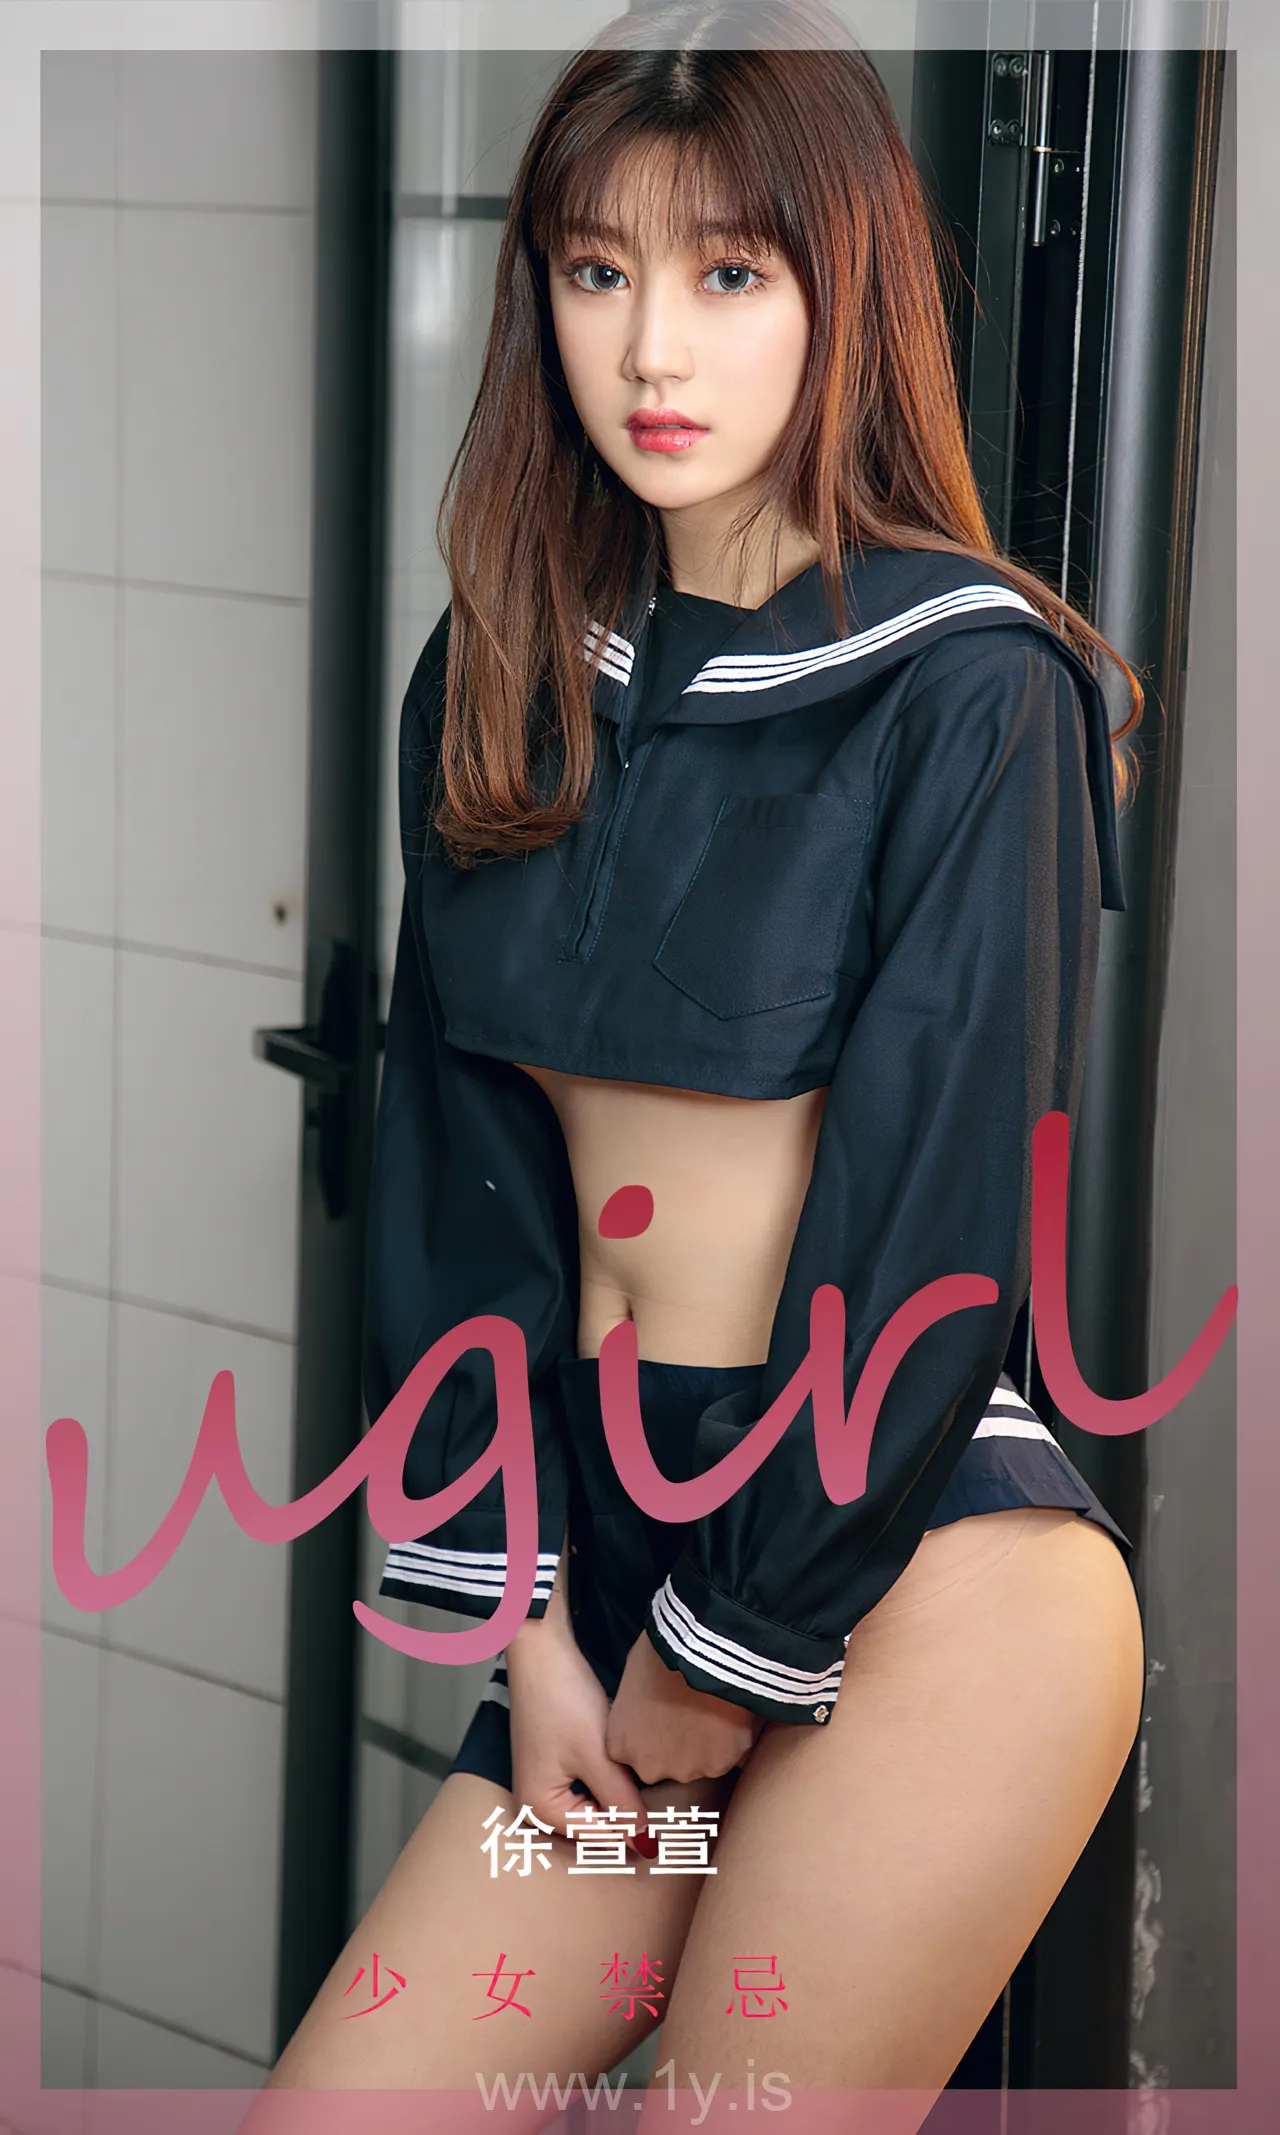 UGIRLS NO.2274 Cute & Adorable Chinese Chick 徐宣萱少女禁忌